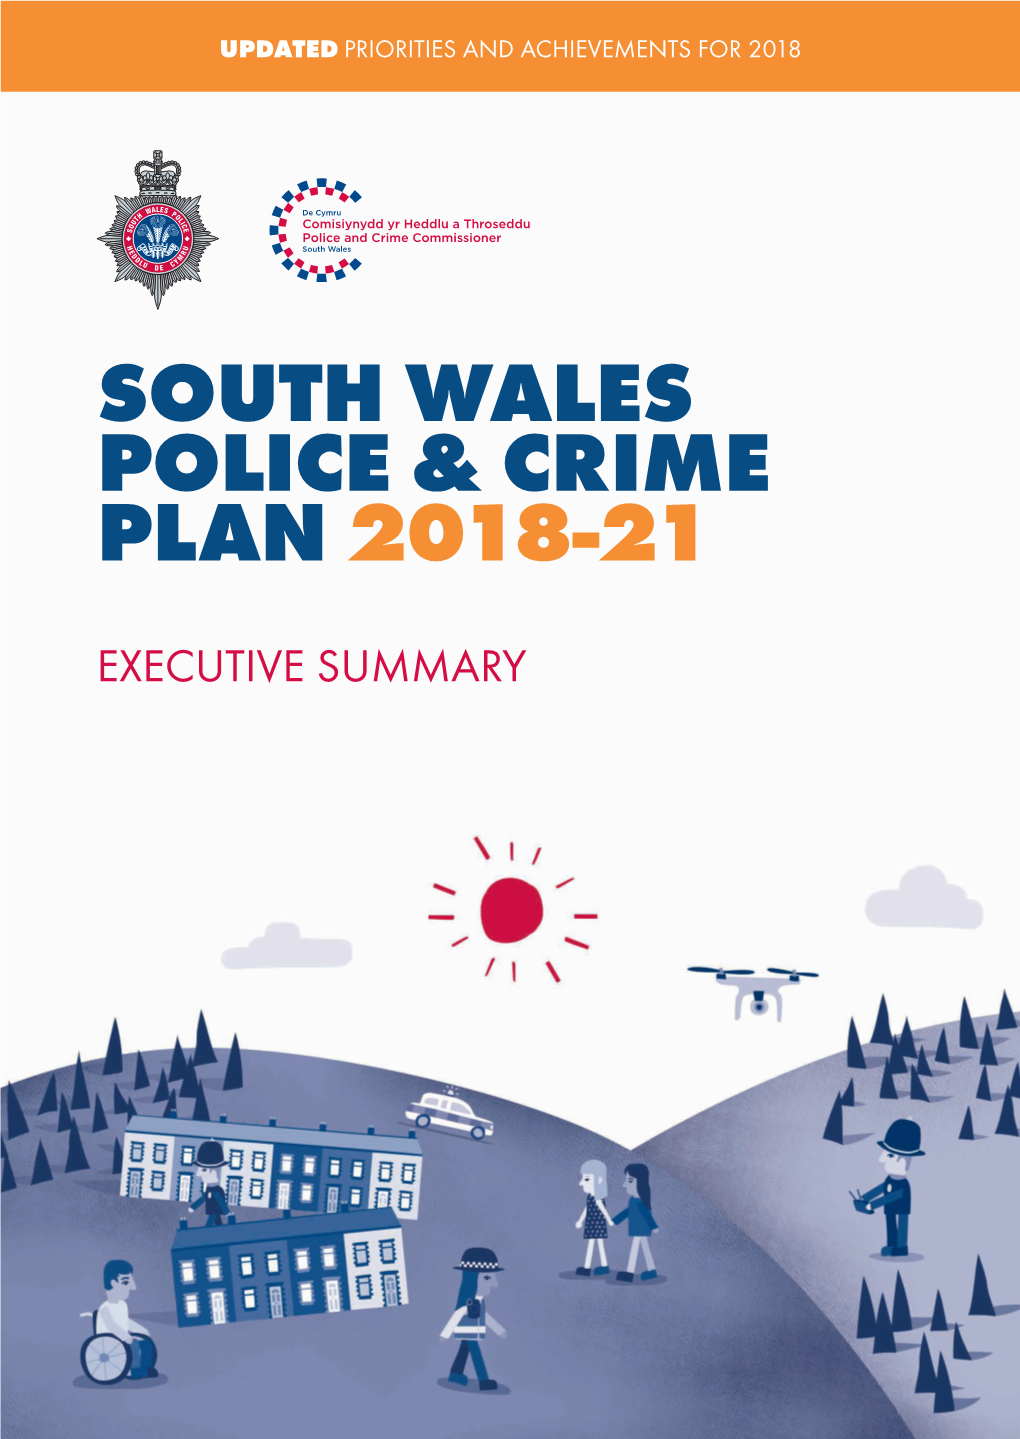 South Wales Police & Crime Plan 2018-21